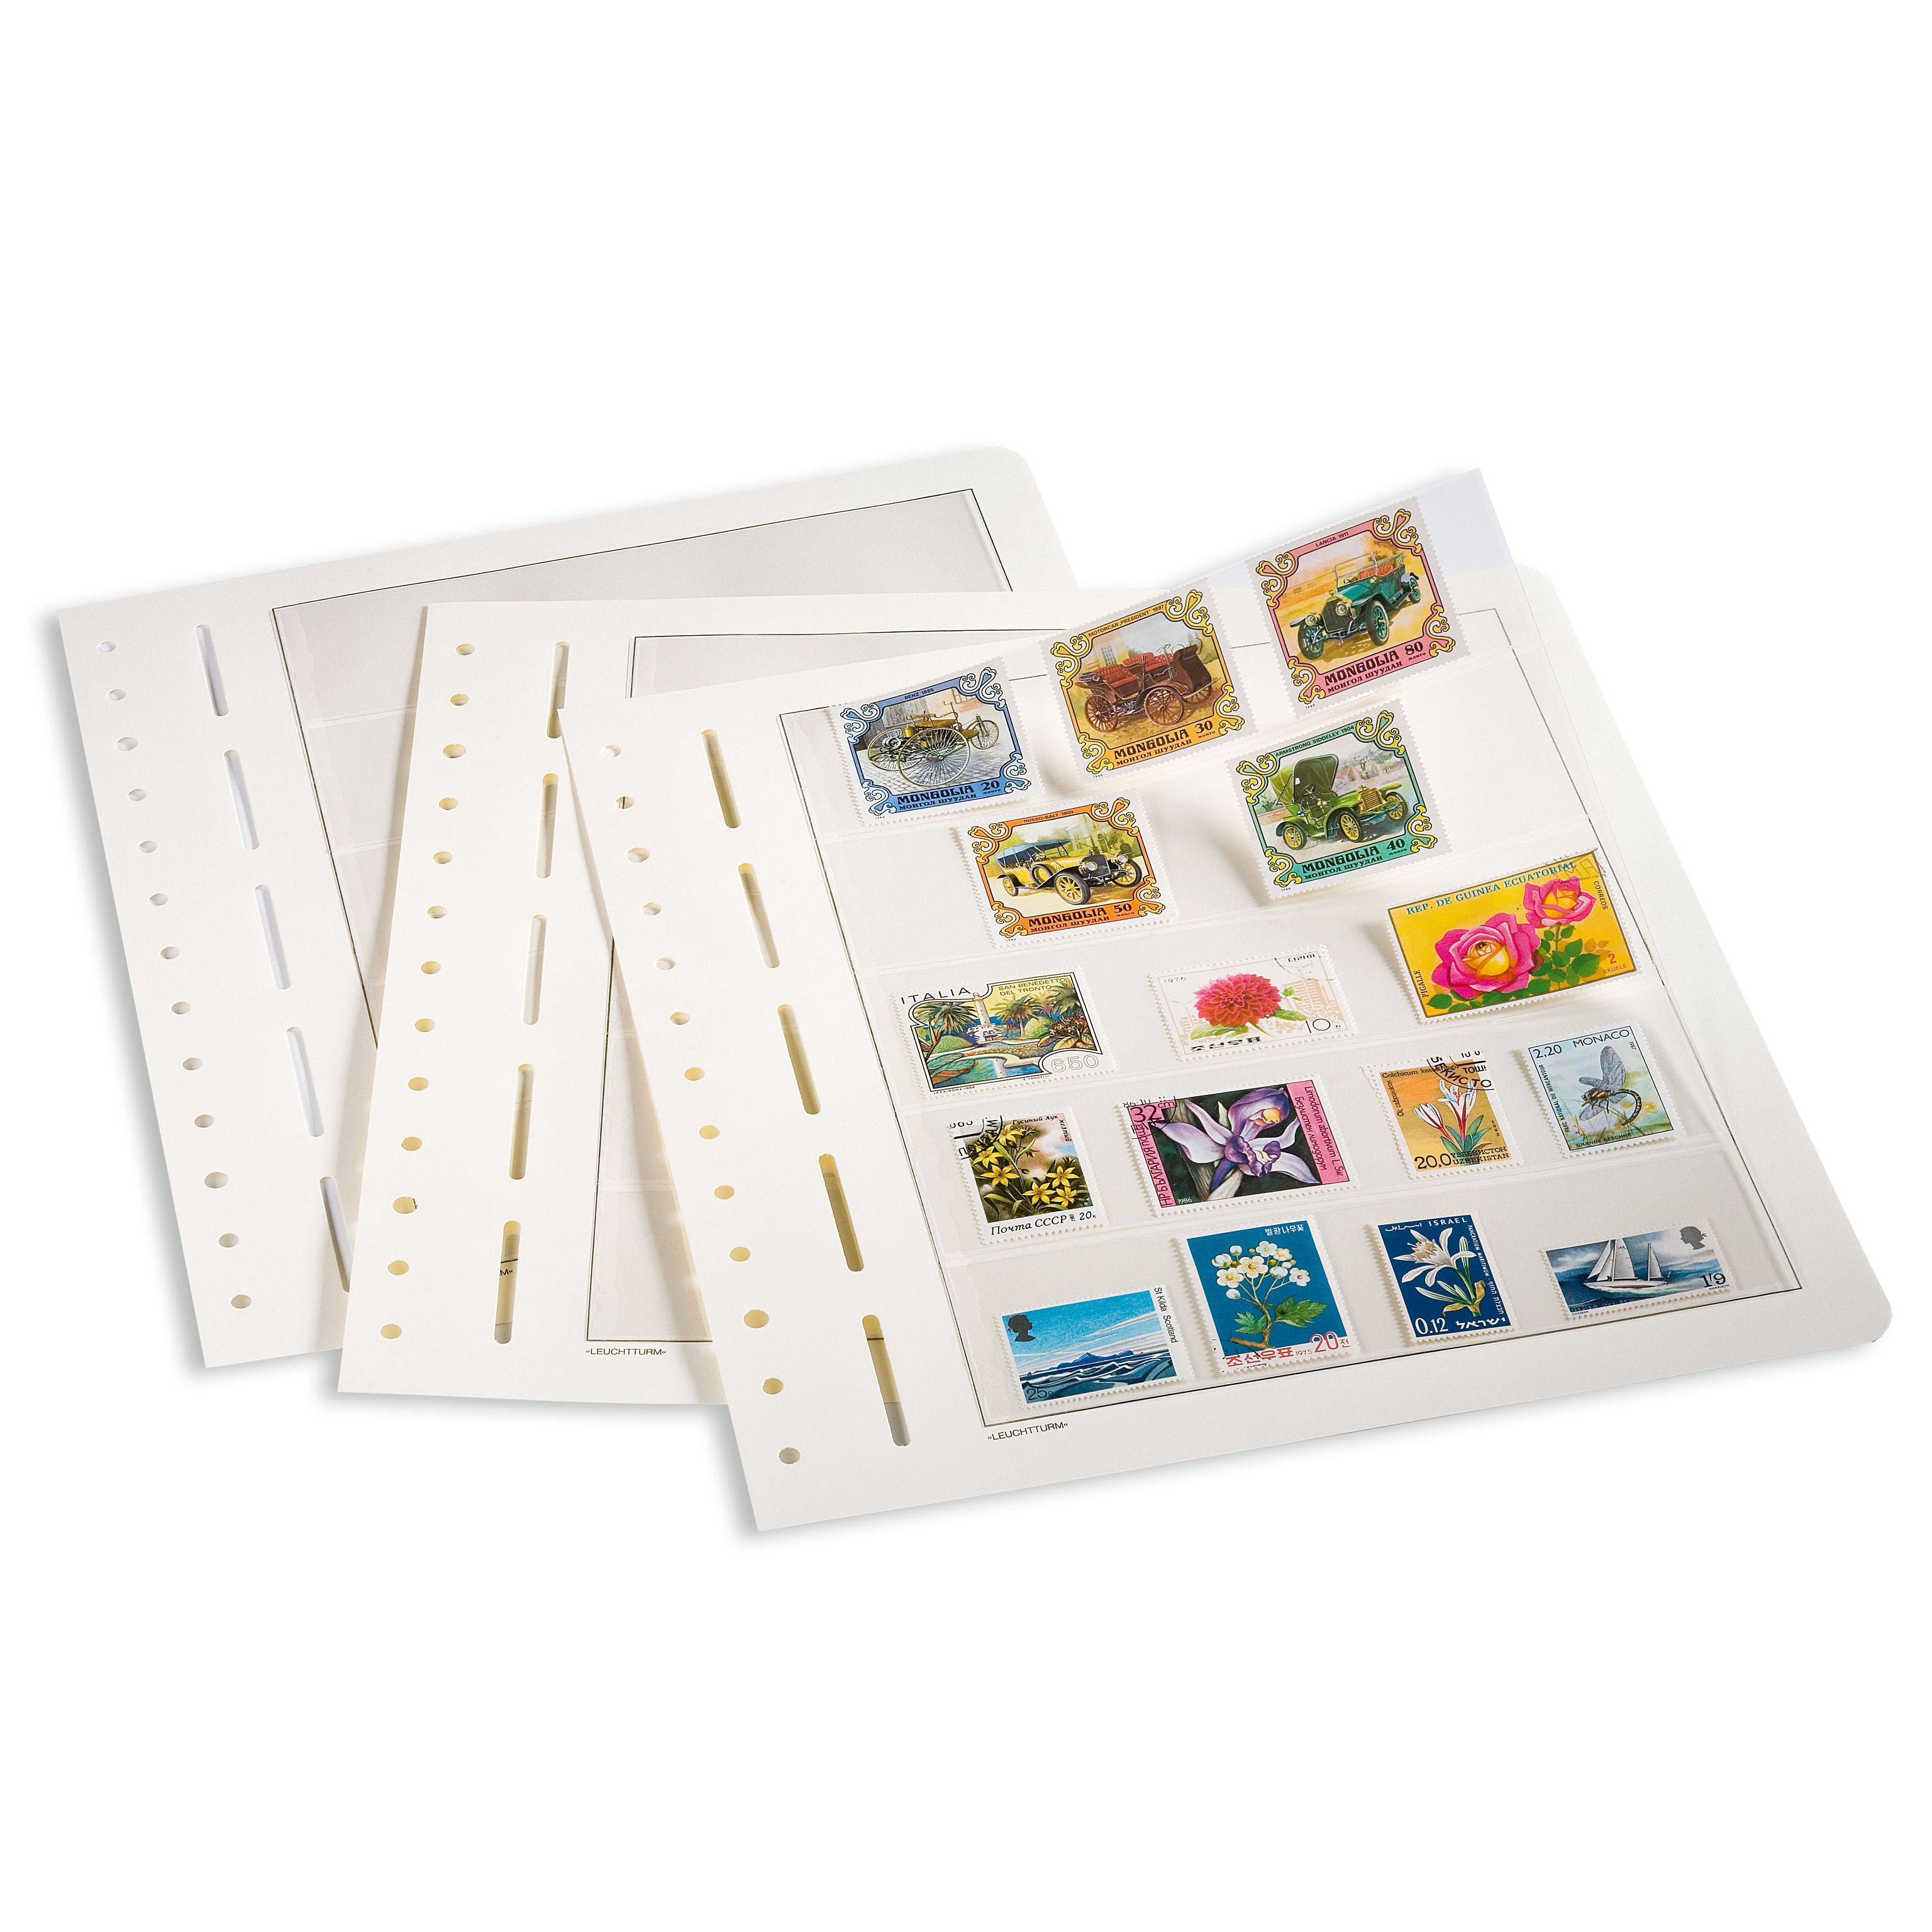 Stamp Collection Book and Album: A First Stamp Album for Beginners,  Organizer for Stamp Collecting - 100 Page Album, 8.5 x 11